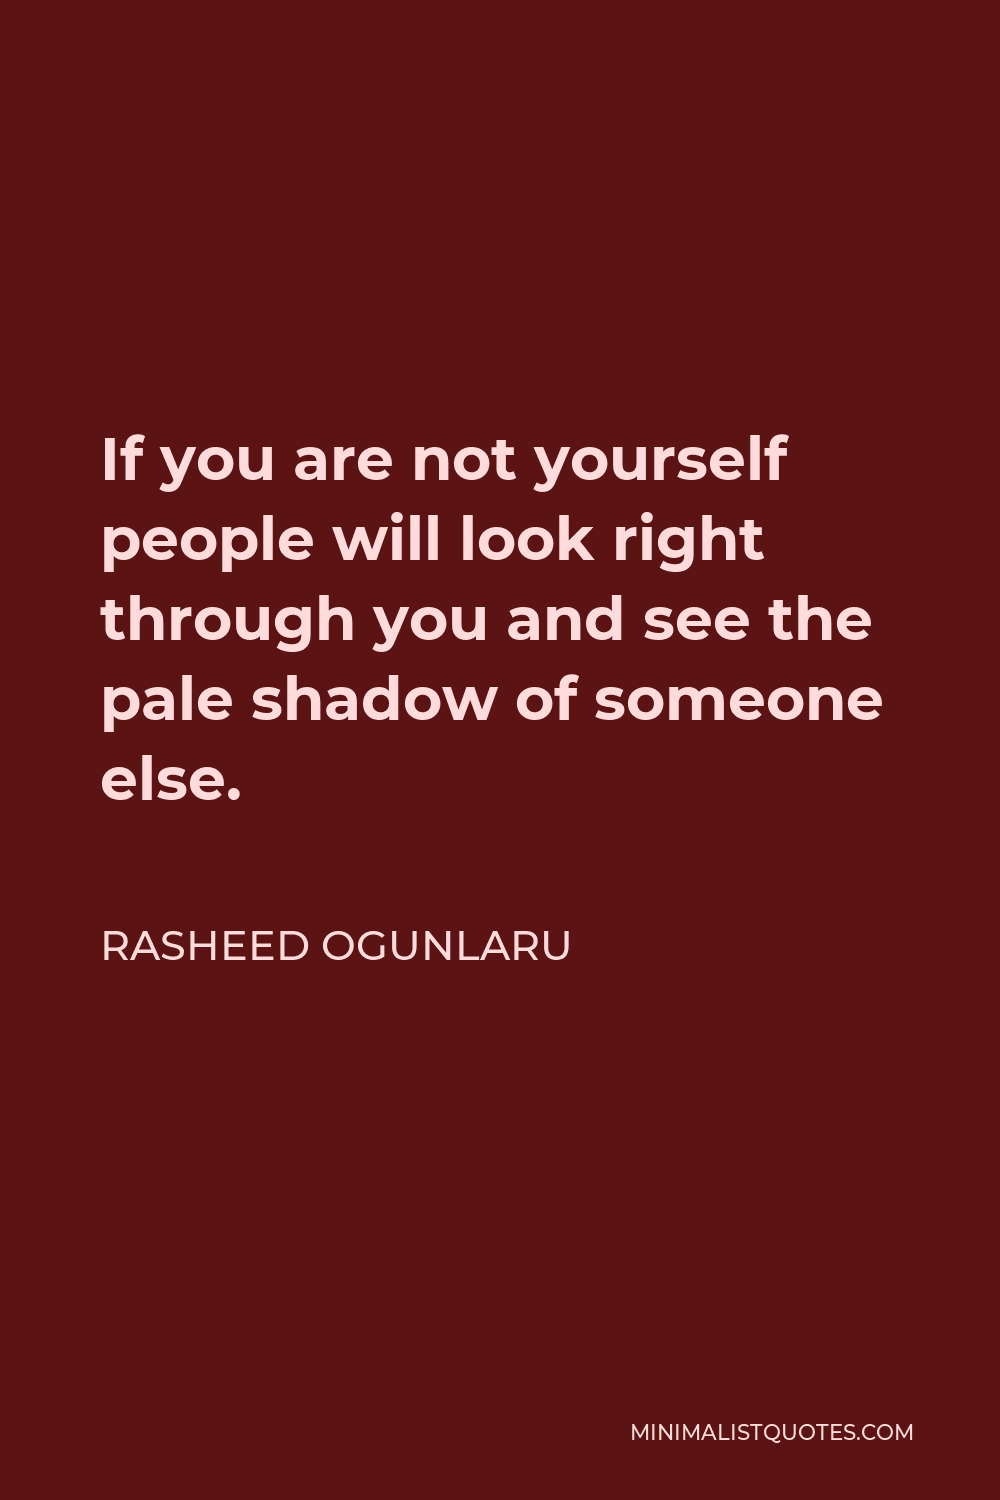 Rasheed Ogunlaru Quote - If you are not yourself people will look right through you and see the pale shadow of someone else.